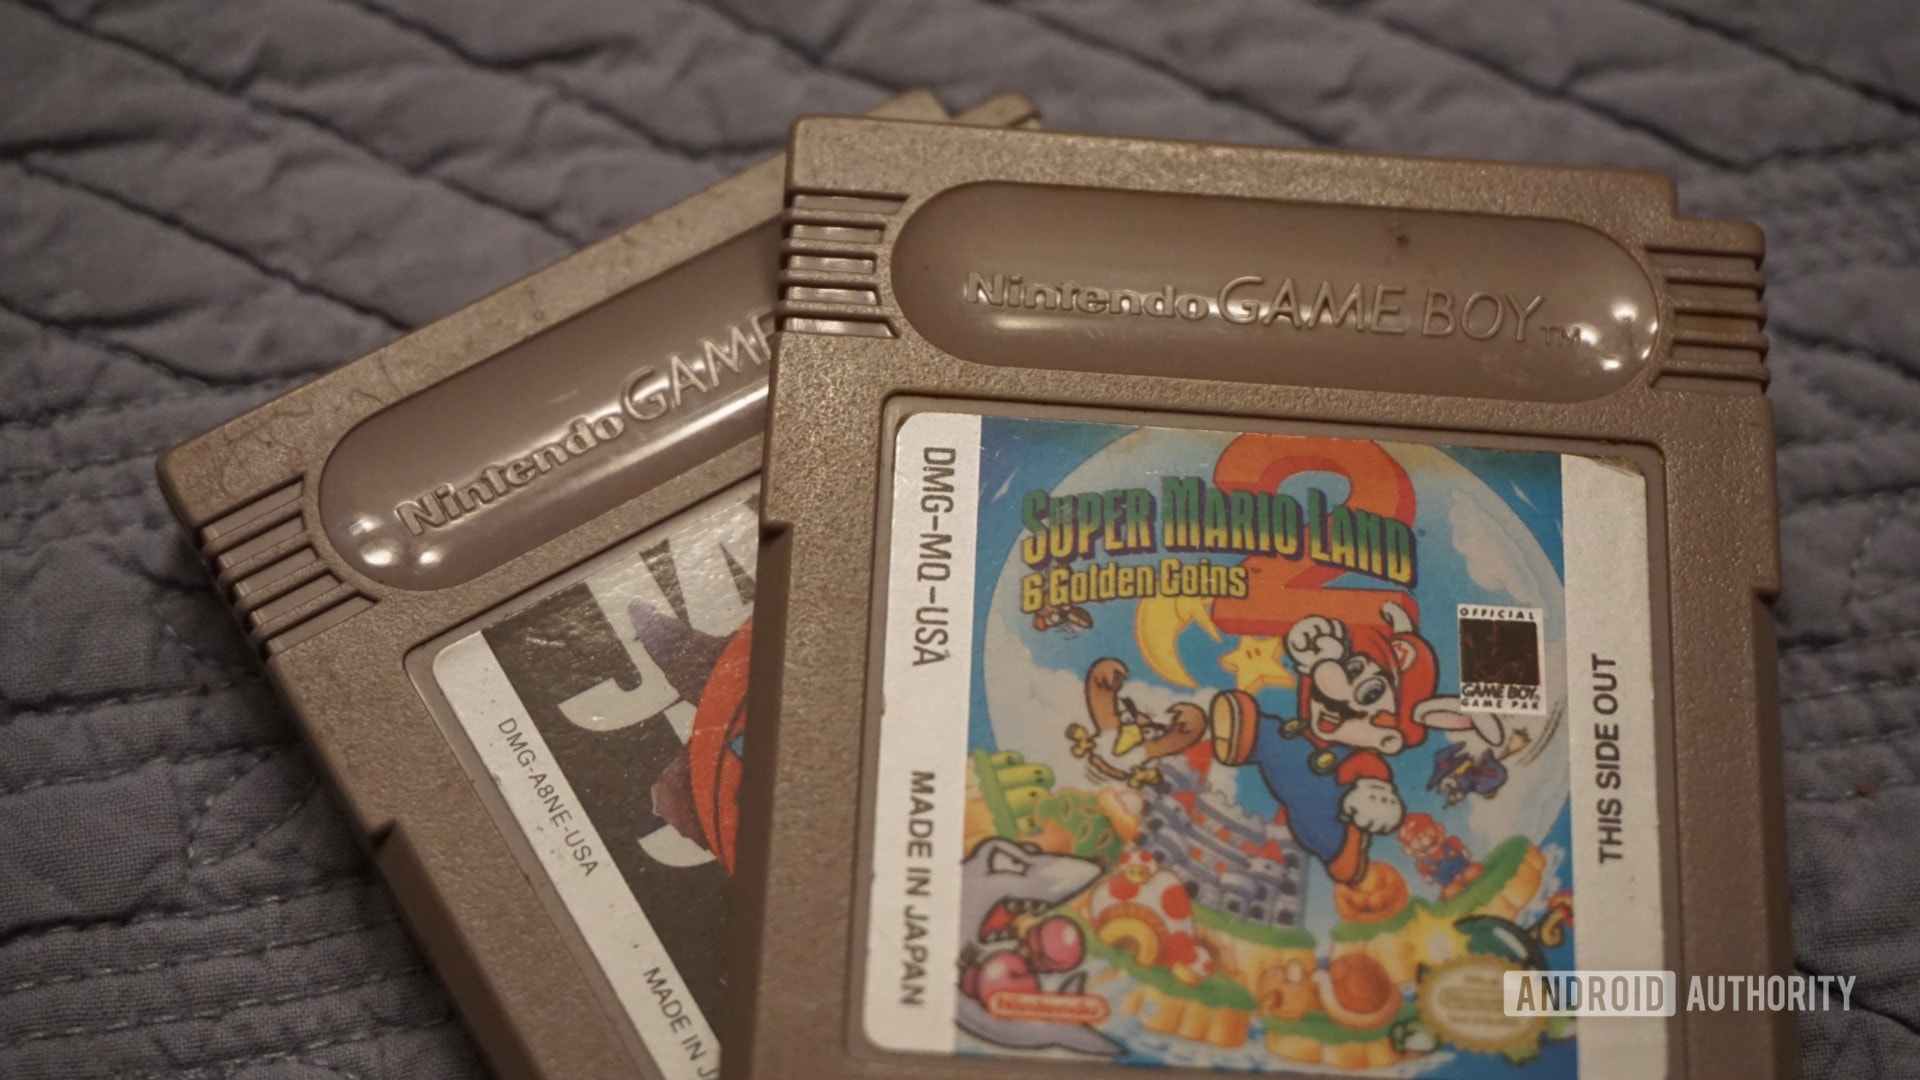 Picture of two Nintendo Game Boy games.